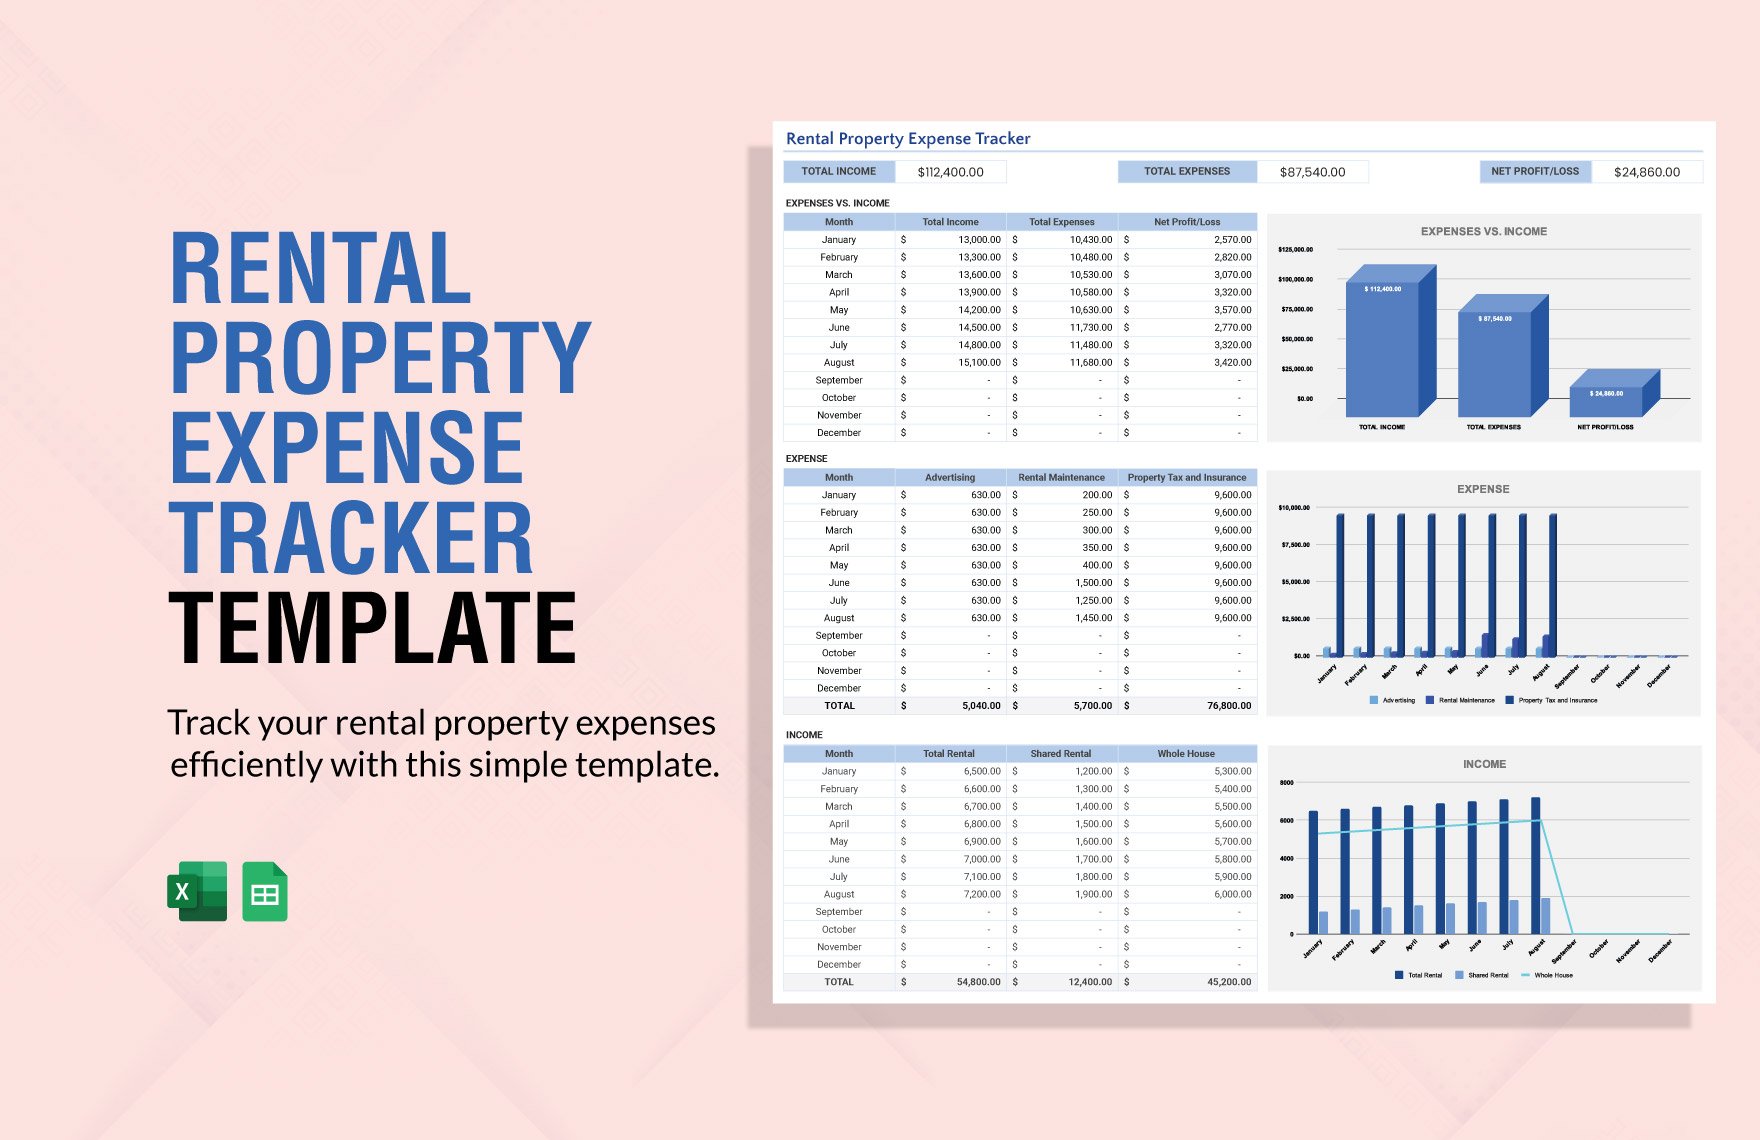 Rental Property Expense Tracker Template in Excel, Google Sheets